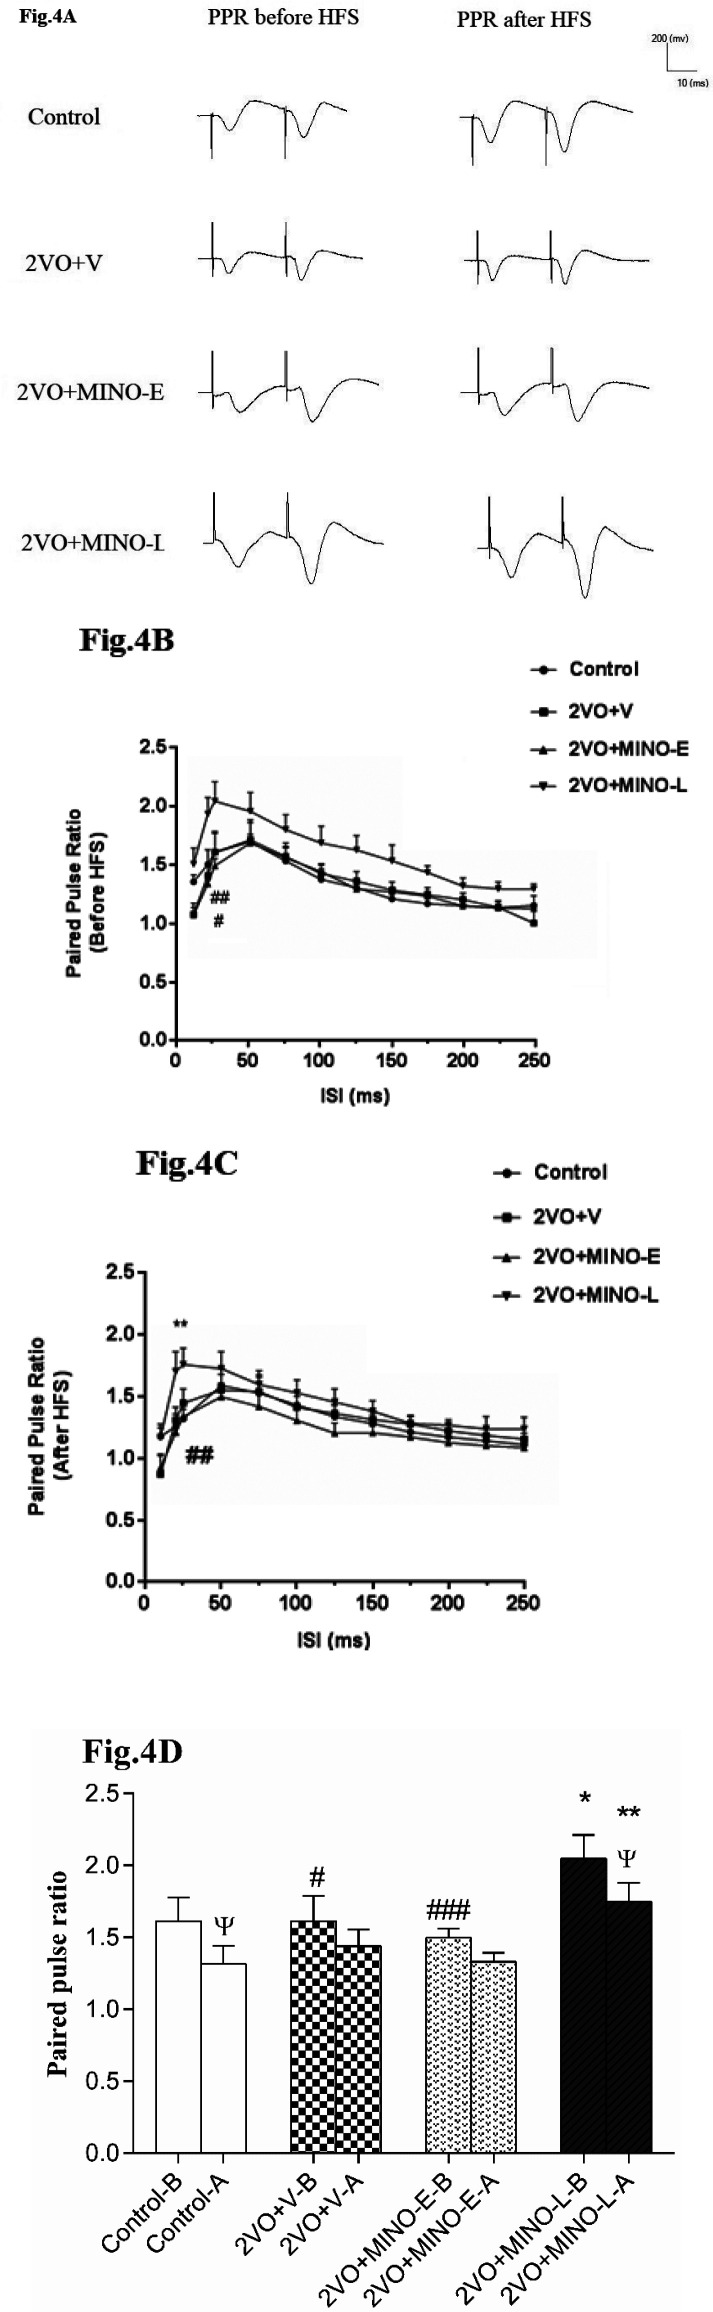 The effect of MINO administration on the PPR (fEPSP2/fEPSP1) in hypoperfused rats. (A)The sample traces are presented for ISI 25 ms in before and after HFS stimulation. (B and C) The linear graph shows the PPR change at ISI 20–250 ms before and after HFS. (D)The Paired-T test comparison of PPR before and after HFS for ISI 25 ms. Values shown as means ± SEM, significant differences with respect to the control (*P < 0.05, **P < 0.01) and 2VO+MINO-L (#P < 0.05, ##P < 0.01 and ###P < 0.001) groups. Significant difference before and after HFS ΨP < 0.05